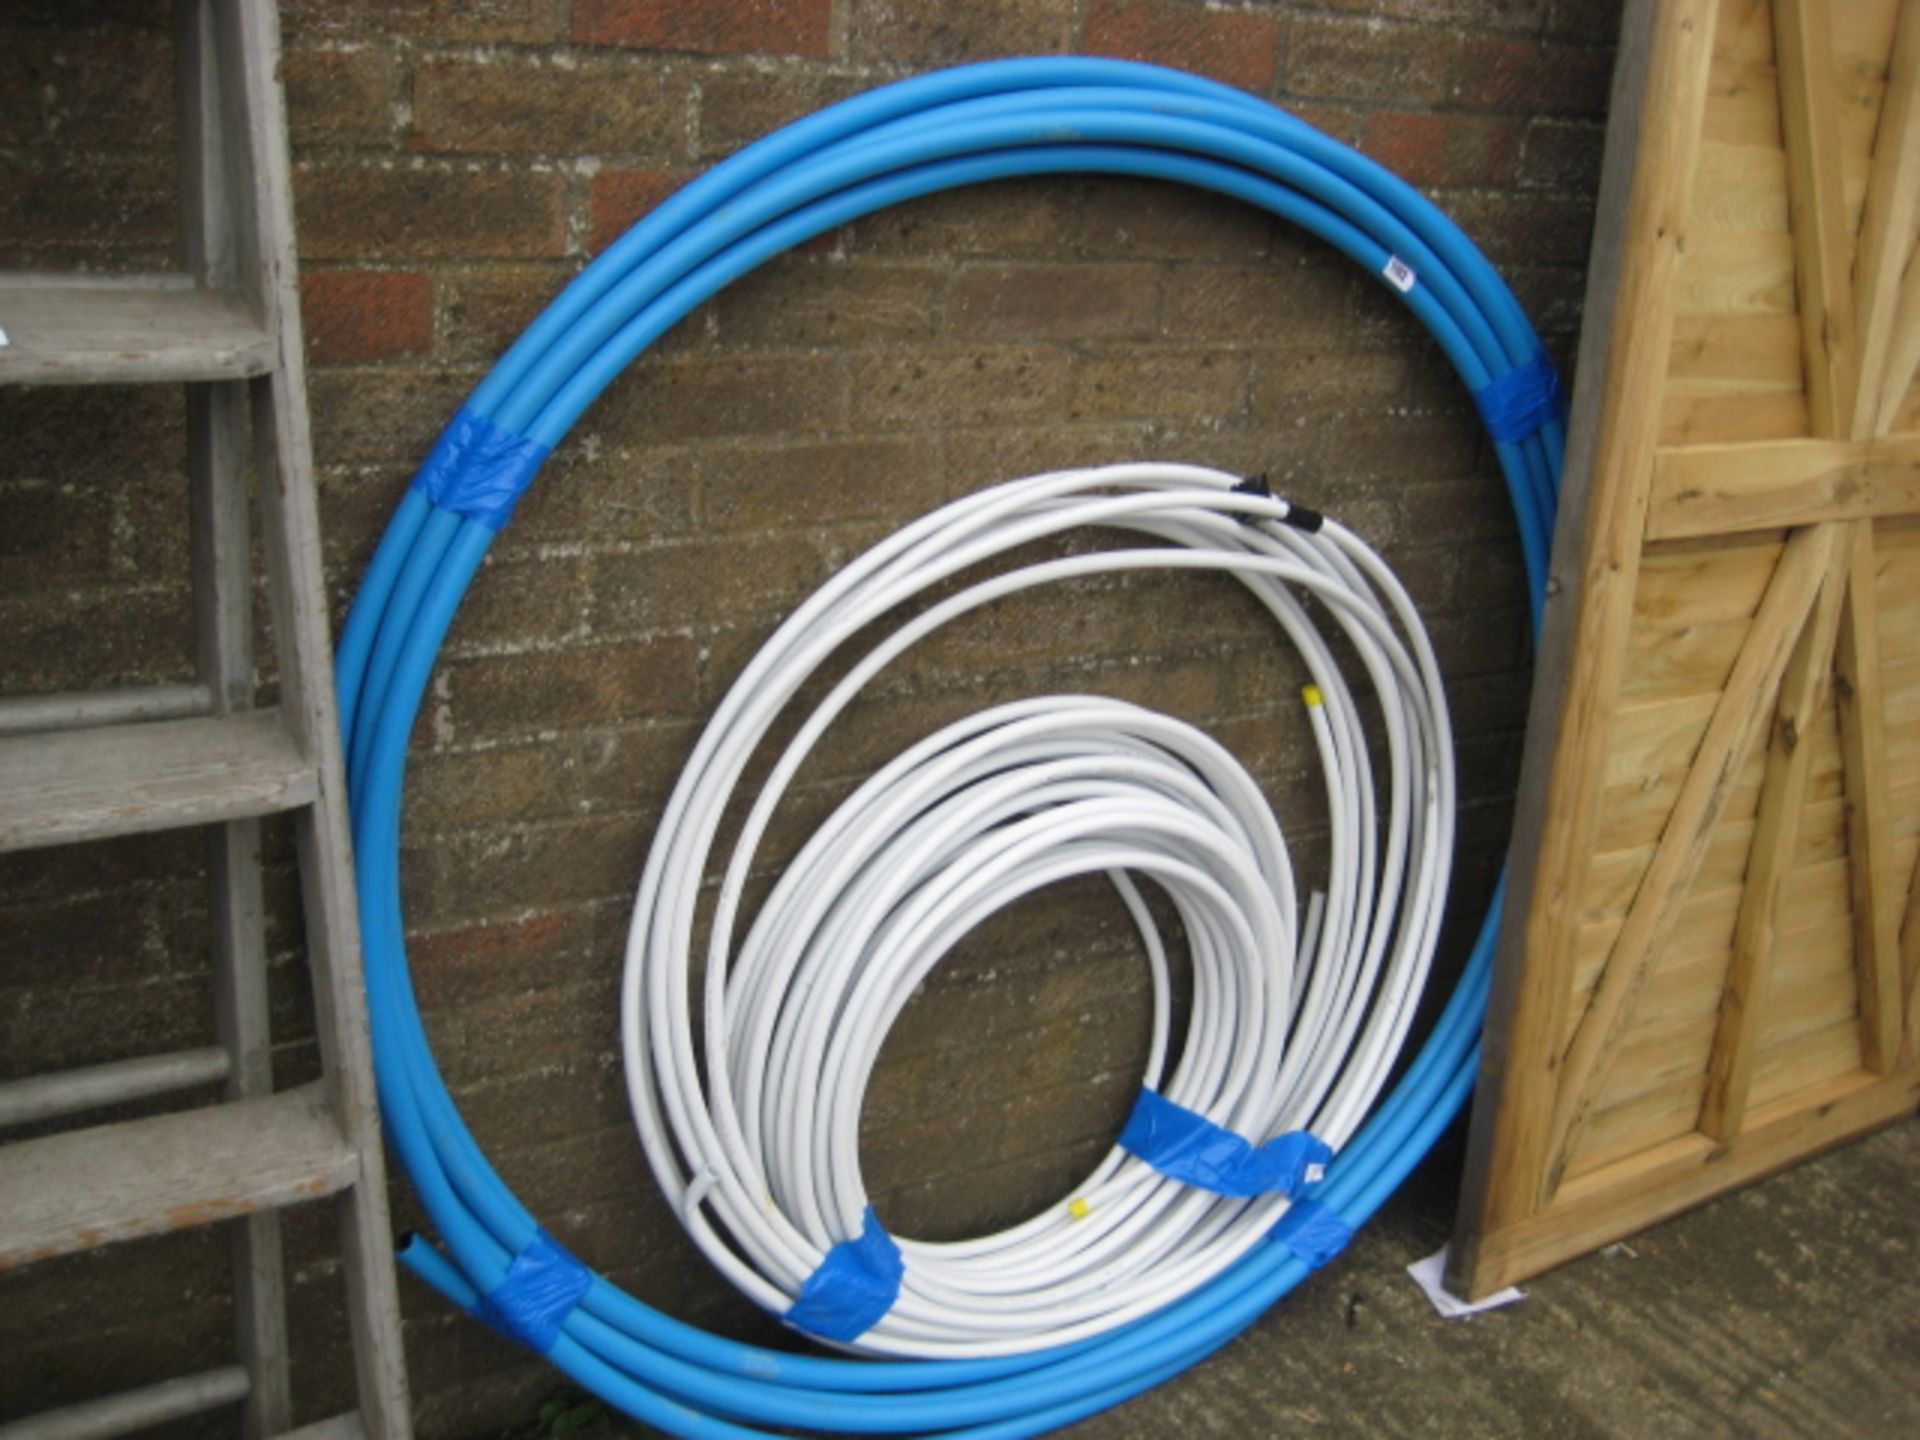 (1149) Quantity of bleu and white irrigation piping